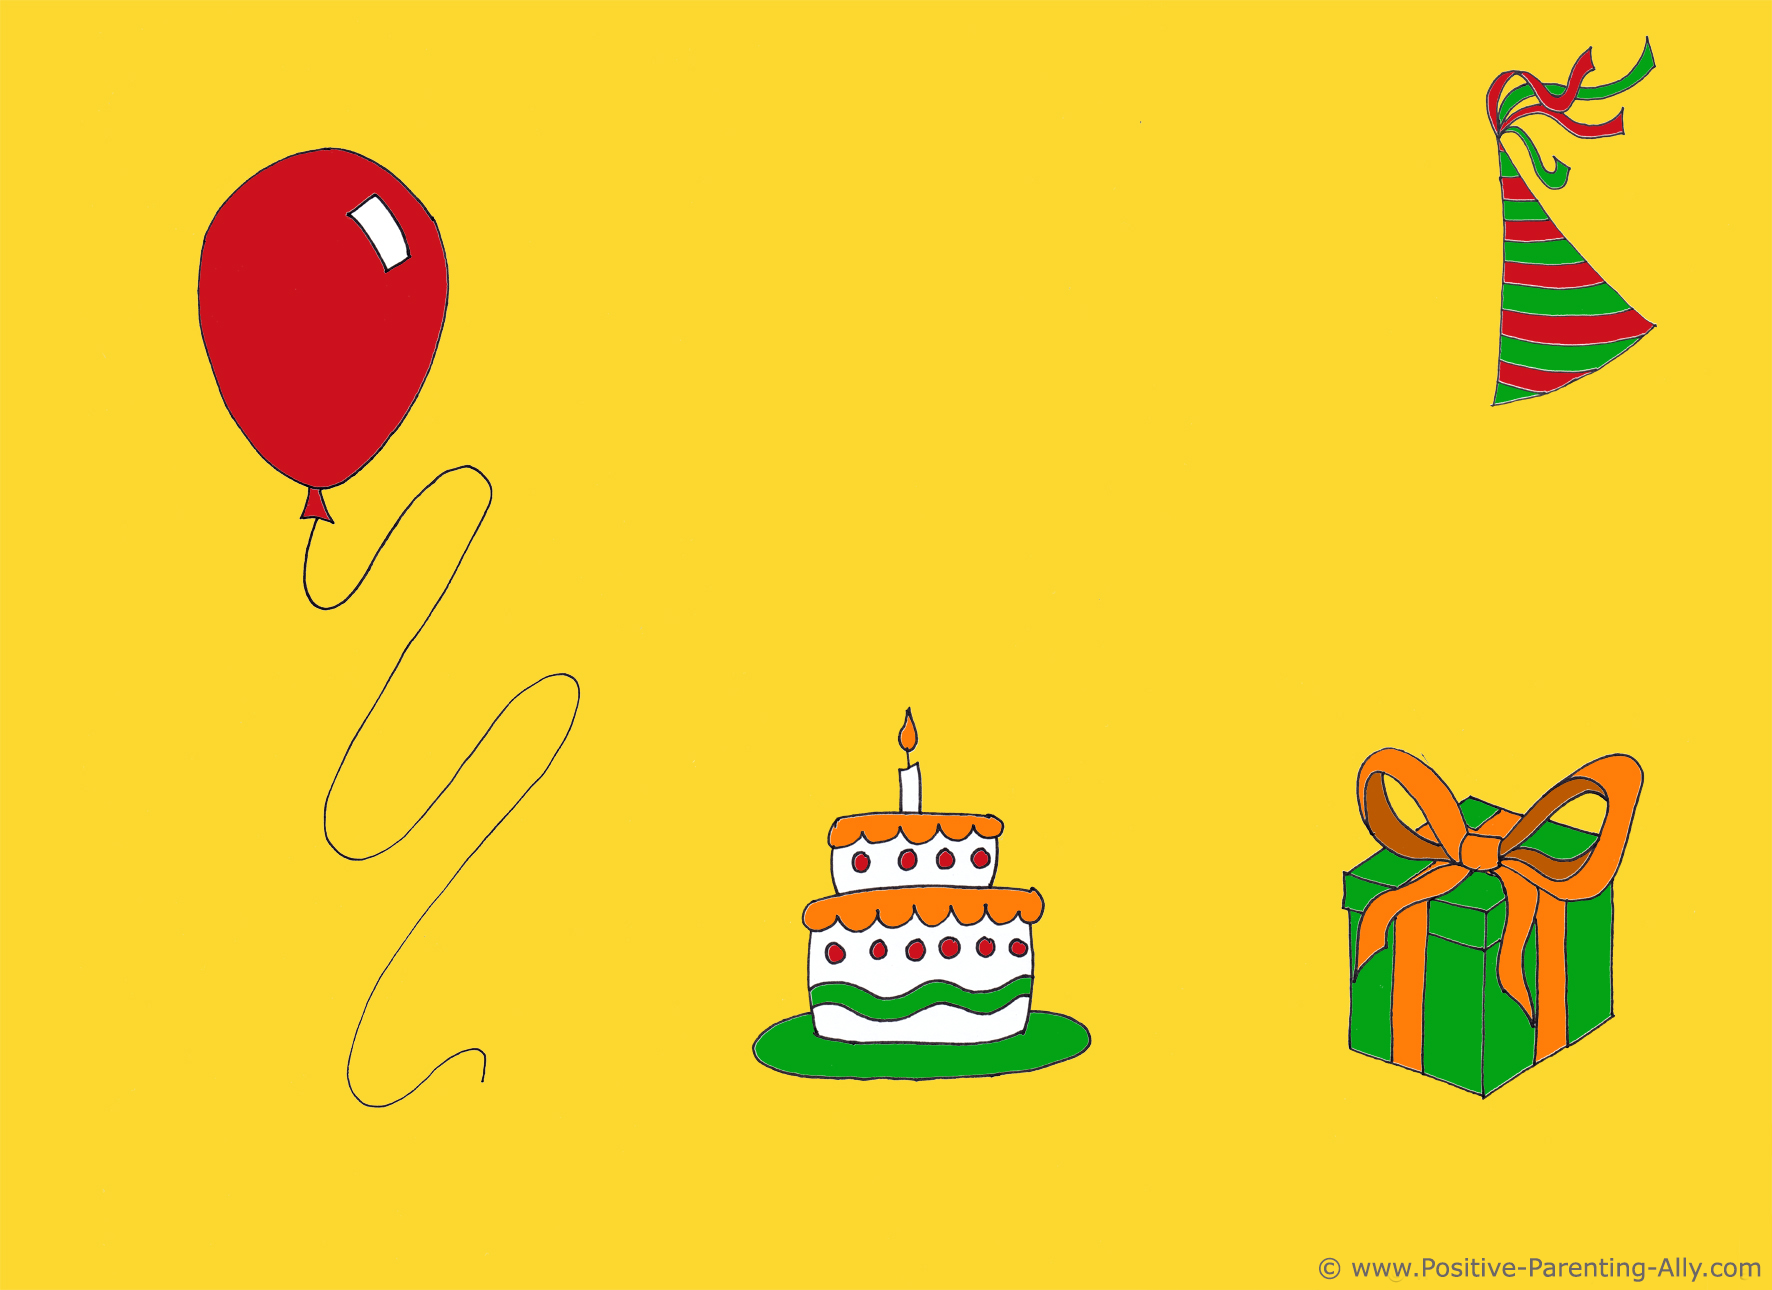 Example of birthday clipart on invite in simple color scheme.